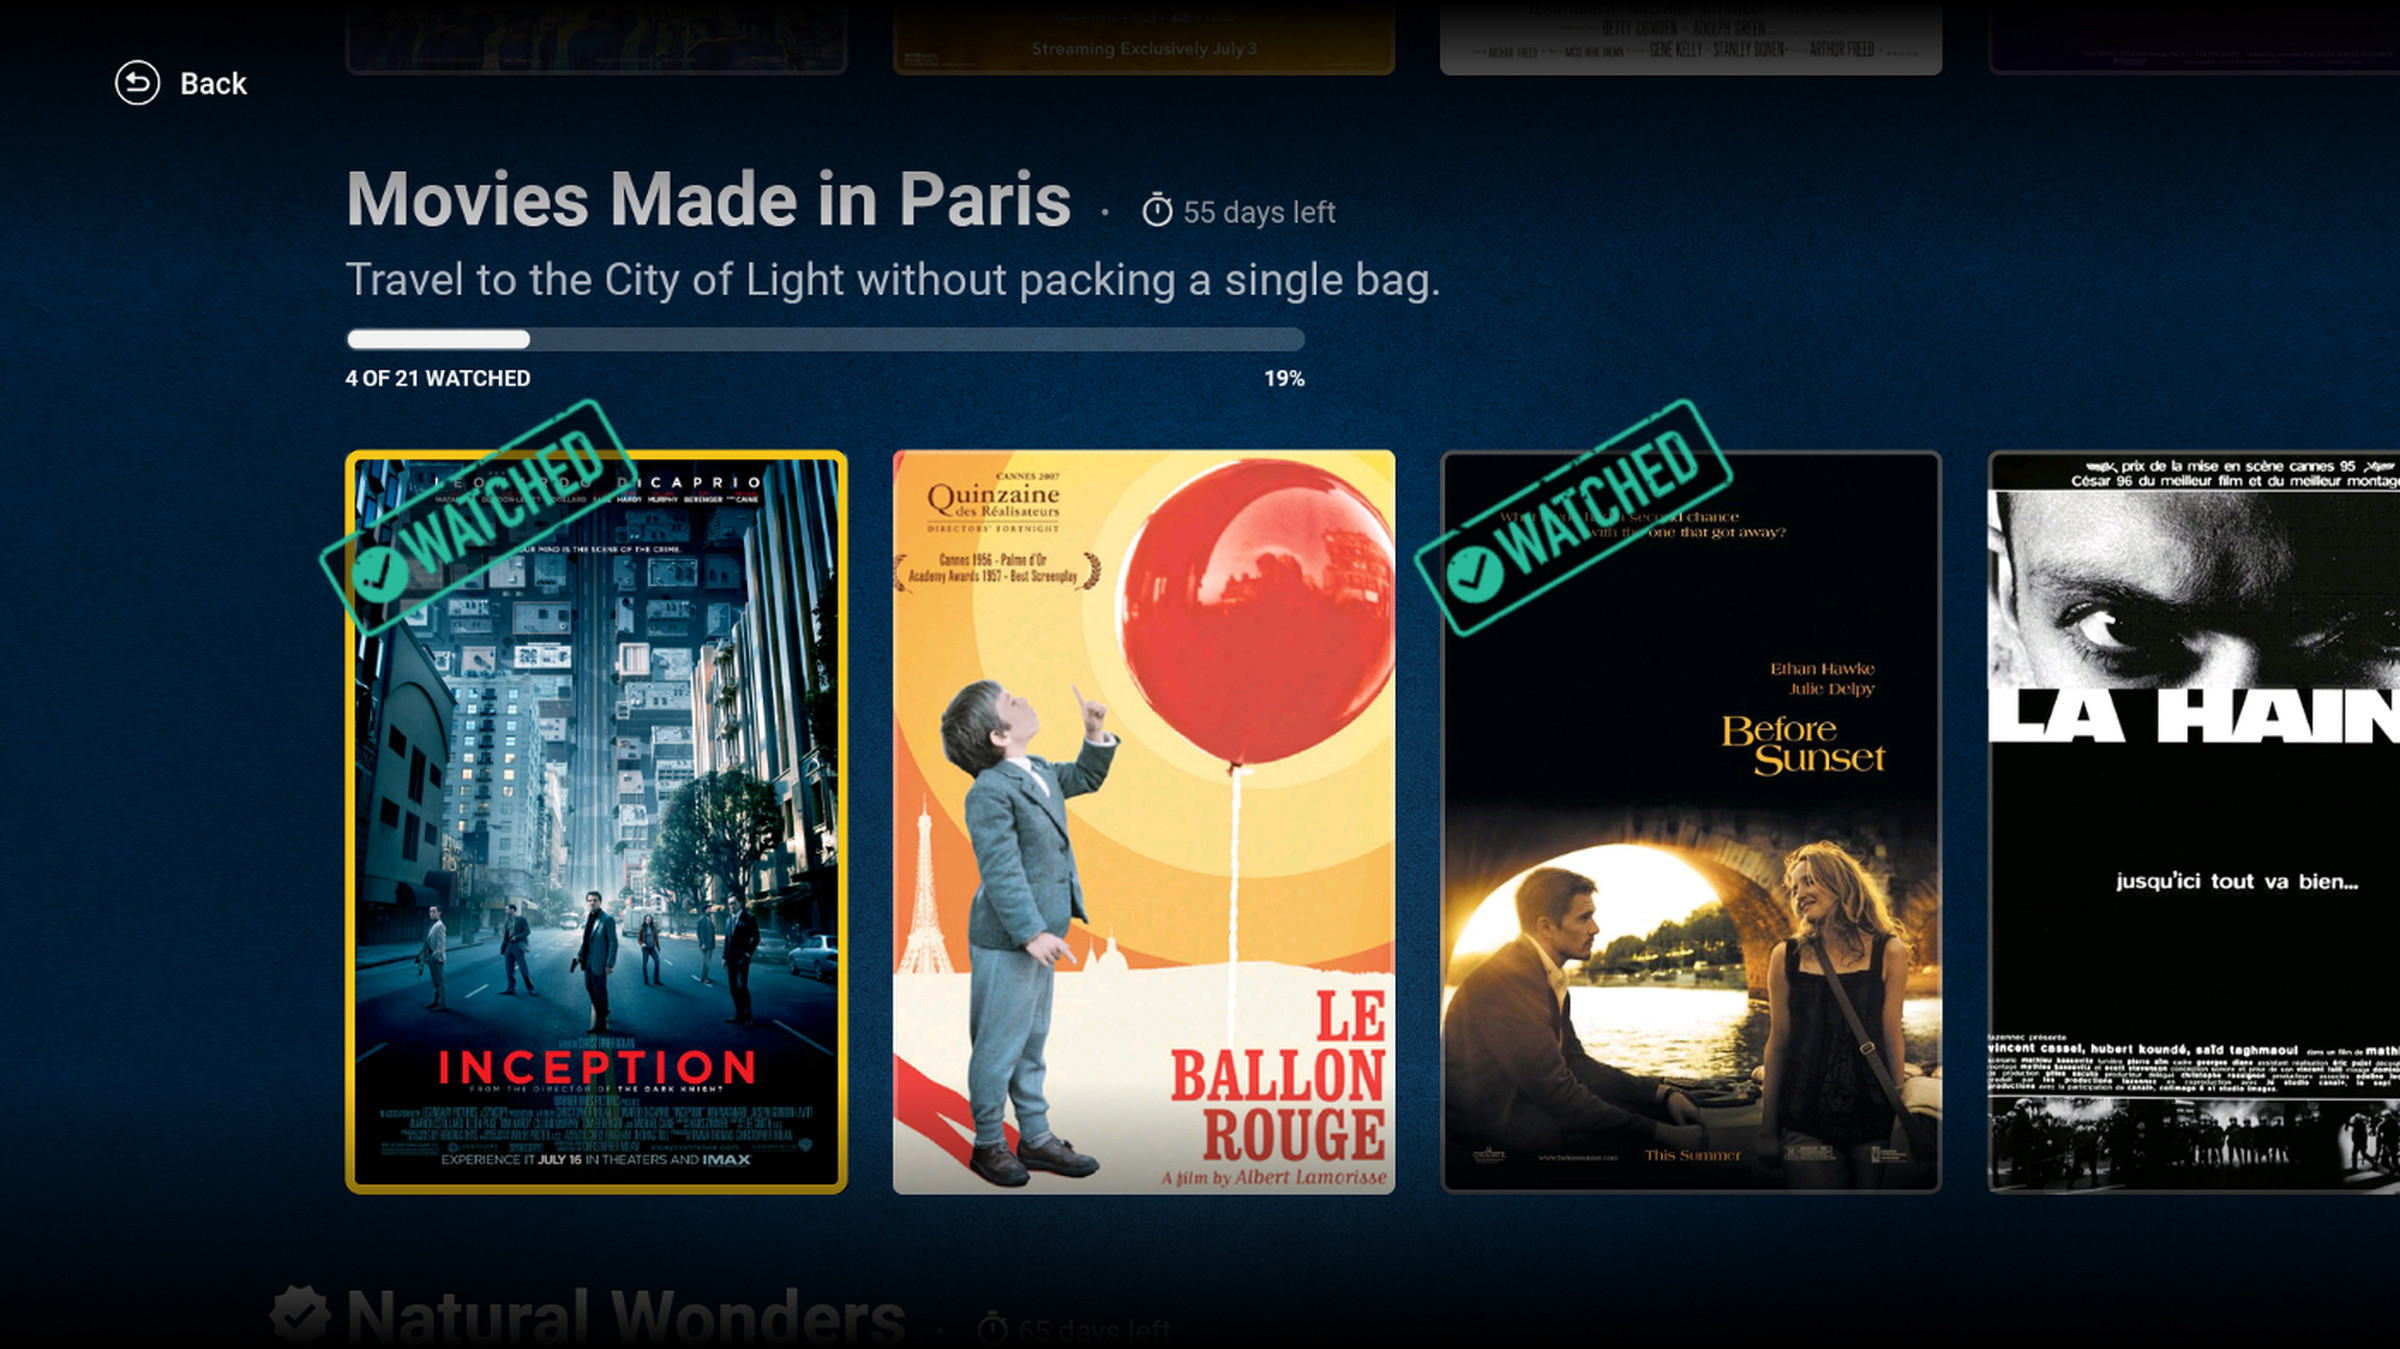 One of Amazon’s example curated lists, where users are challenged to watch 21 movies.